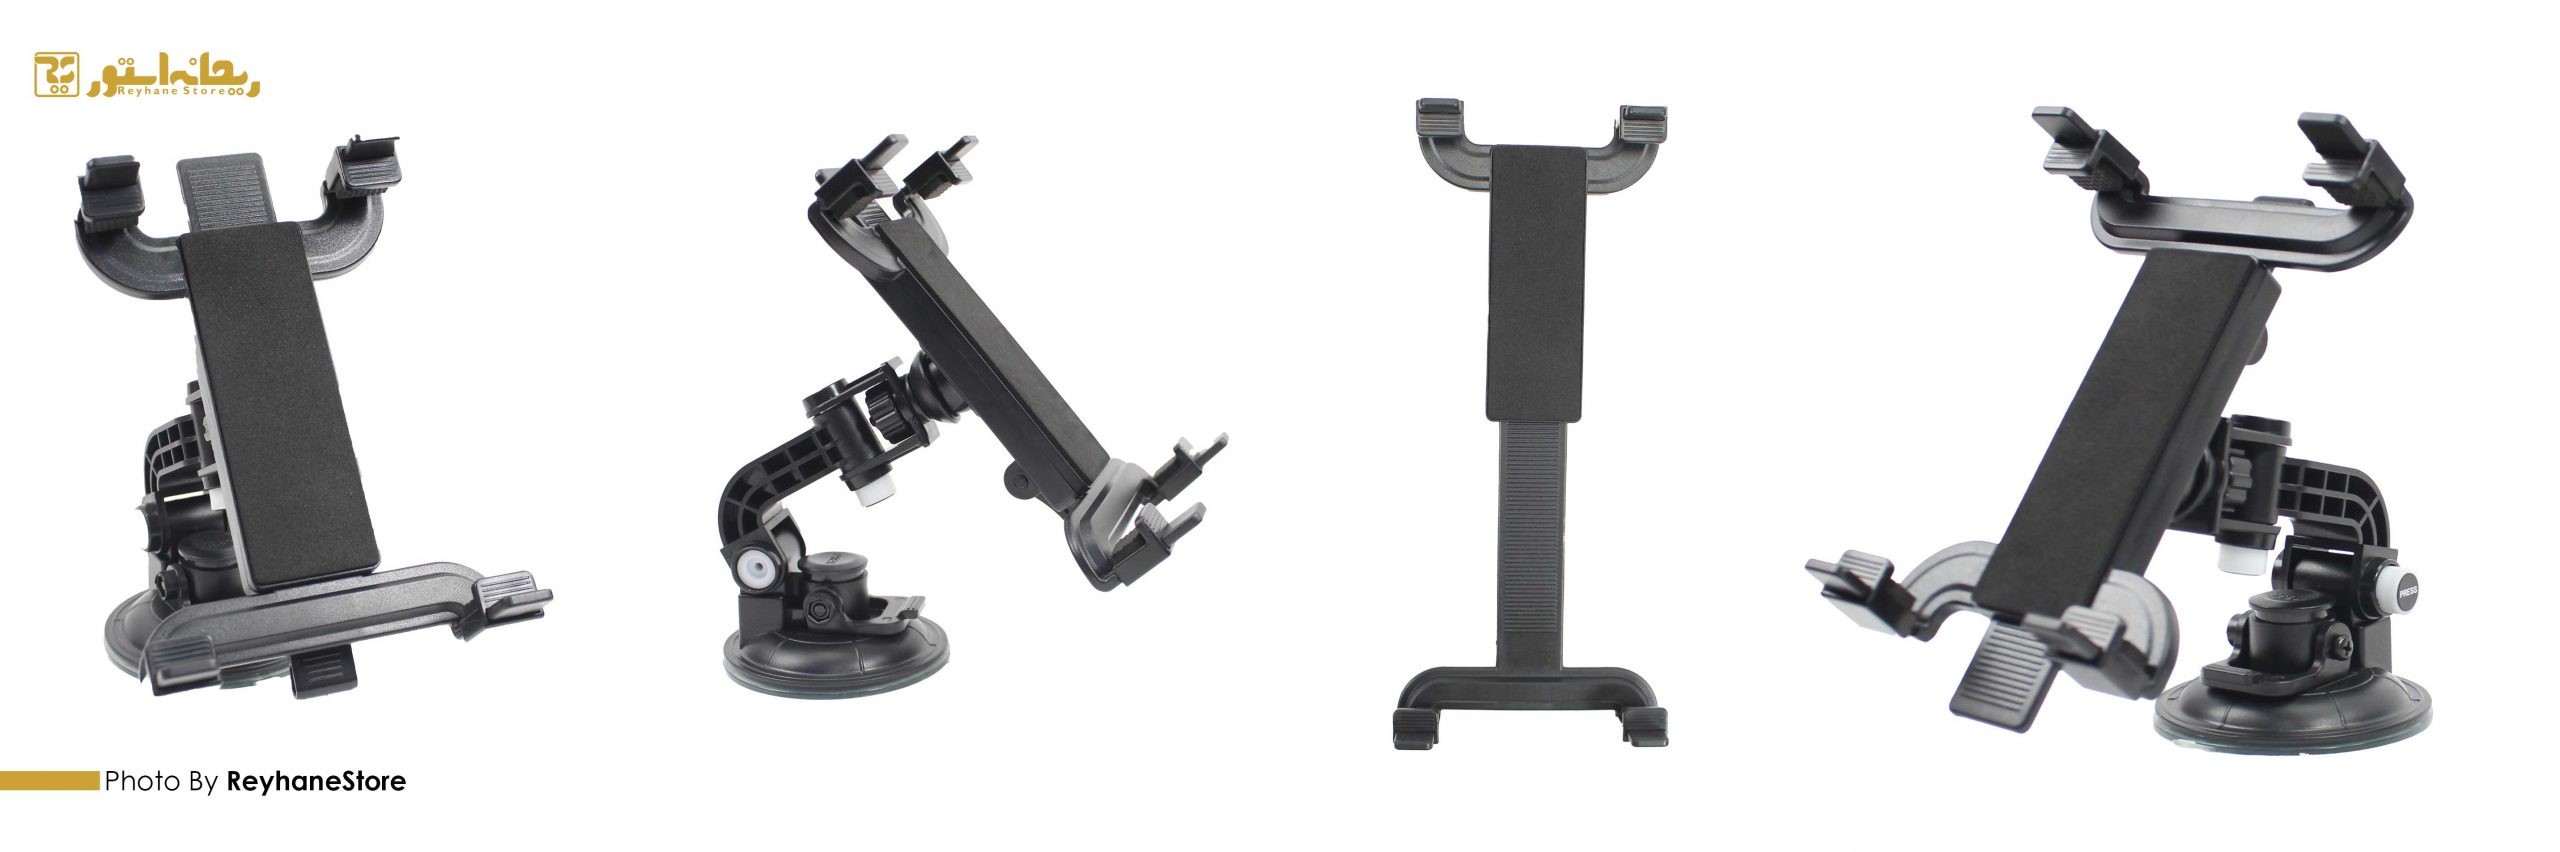 Tablet holder FLY S2206W-F